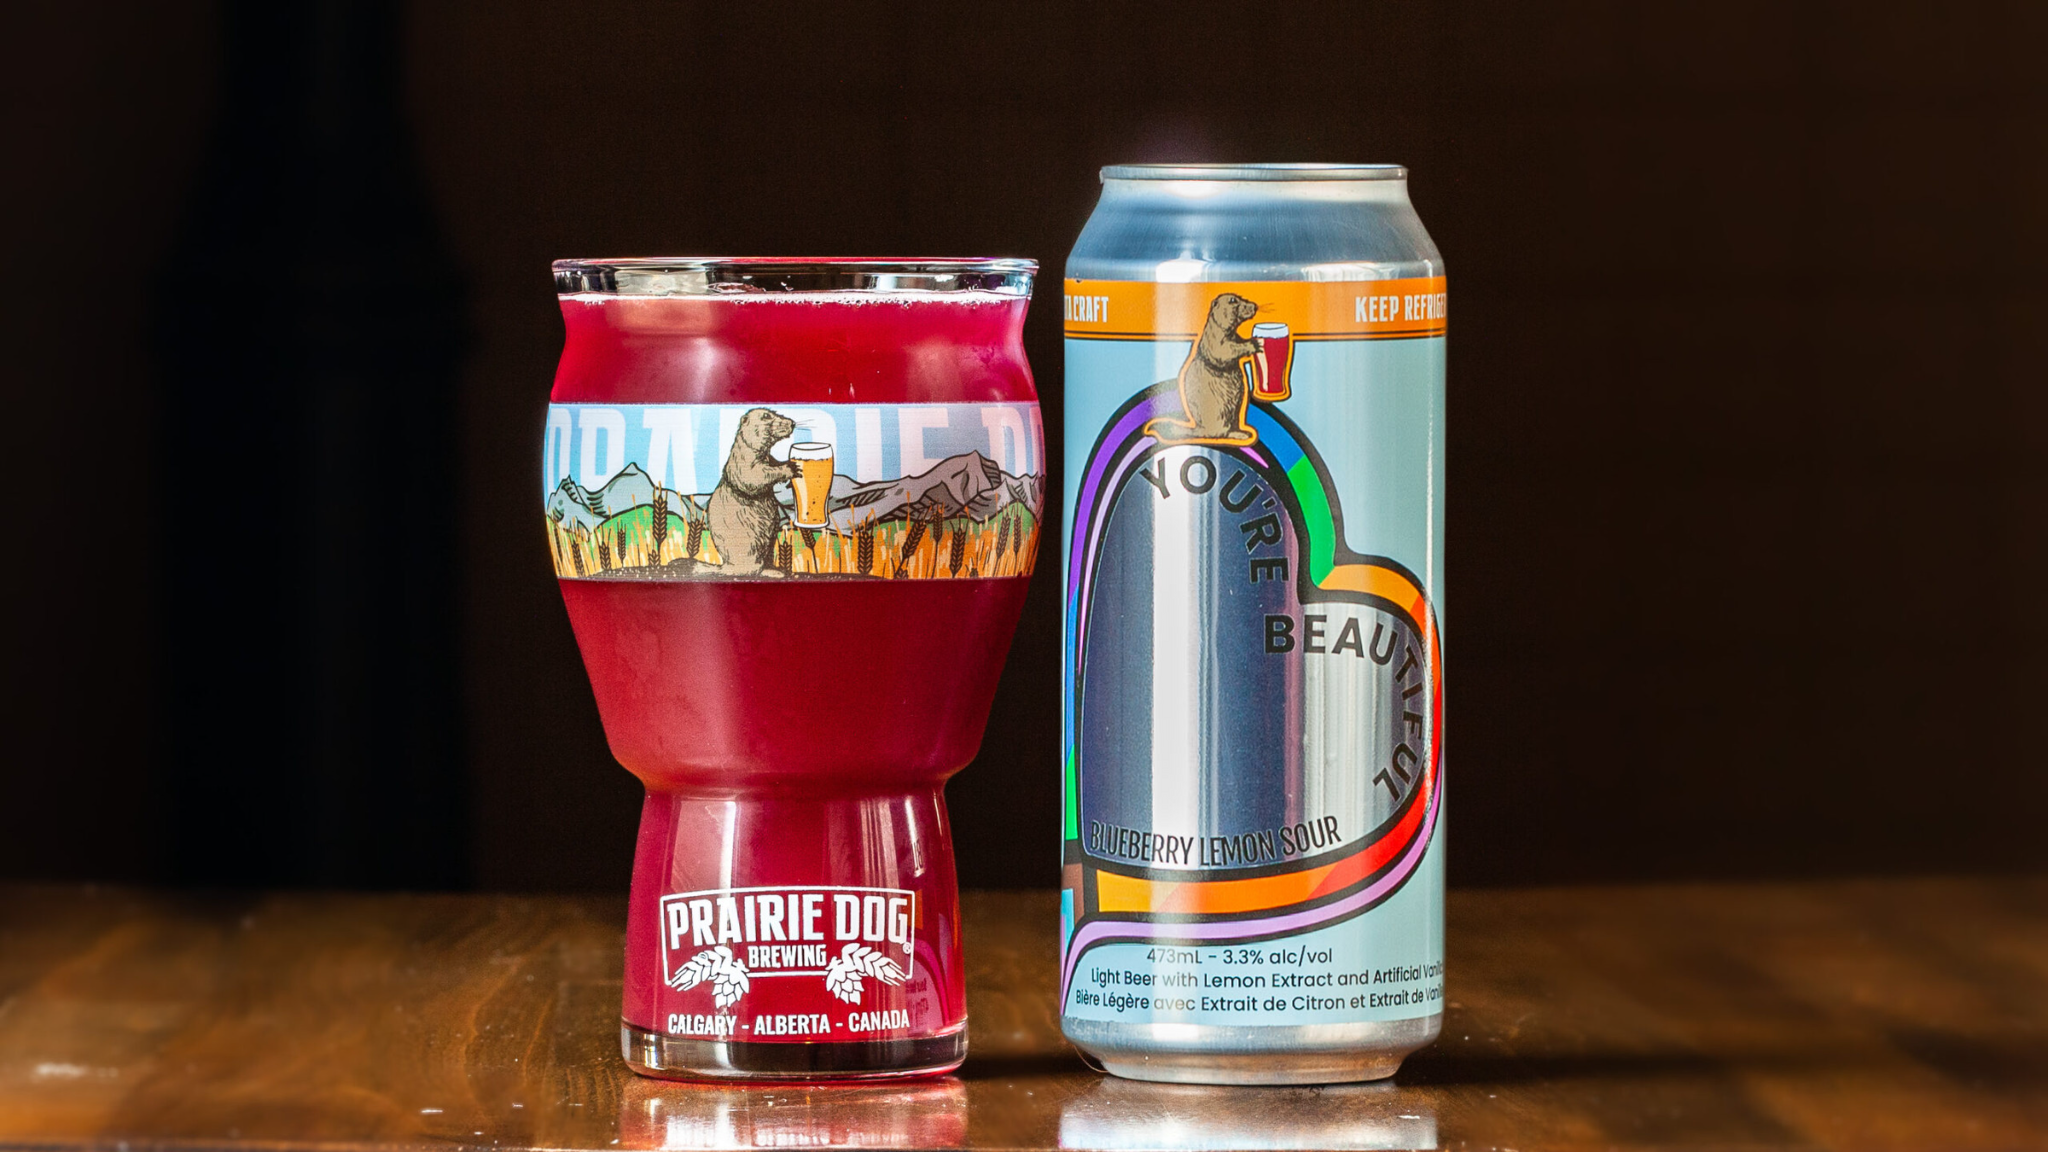 A 473-ml pint glass of brightly coloured beer next to a can of Prairie Dog Brewing You're Beautiful Blueberry Lemon Sour Beer in full colour wrapped label.